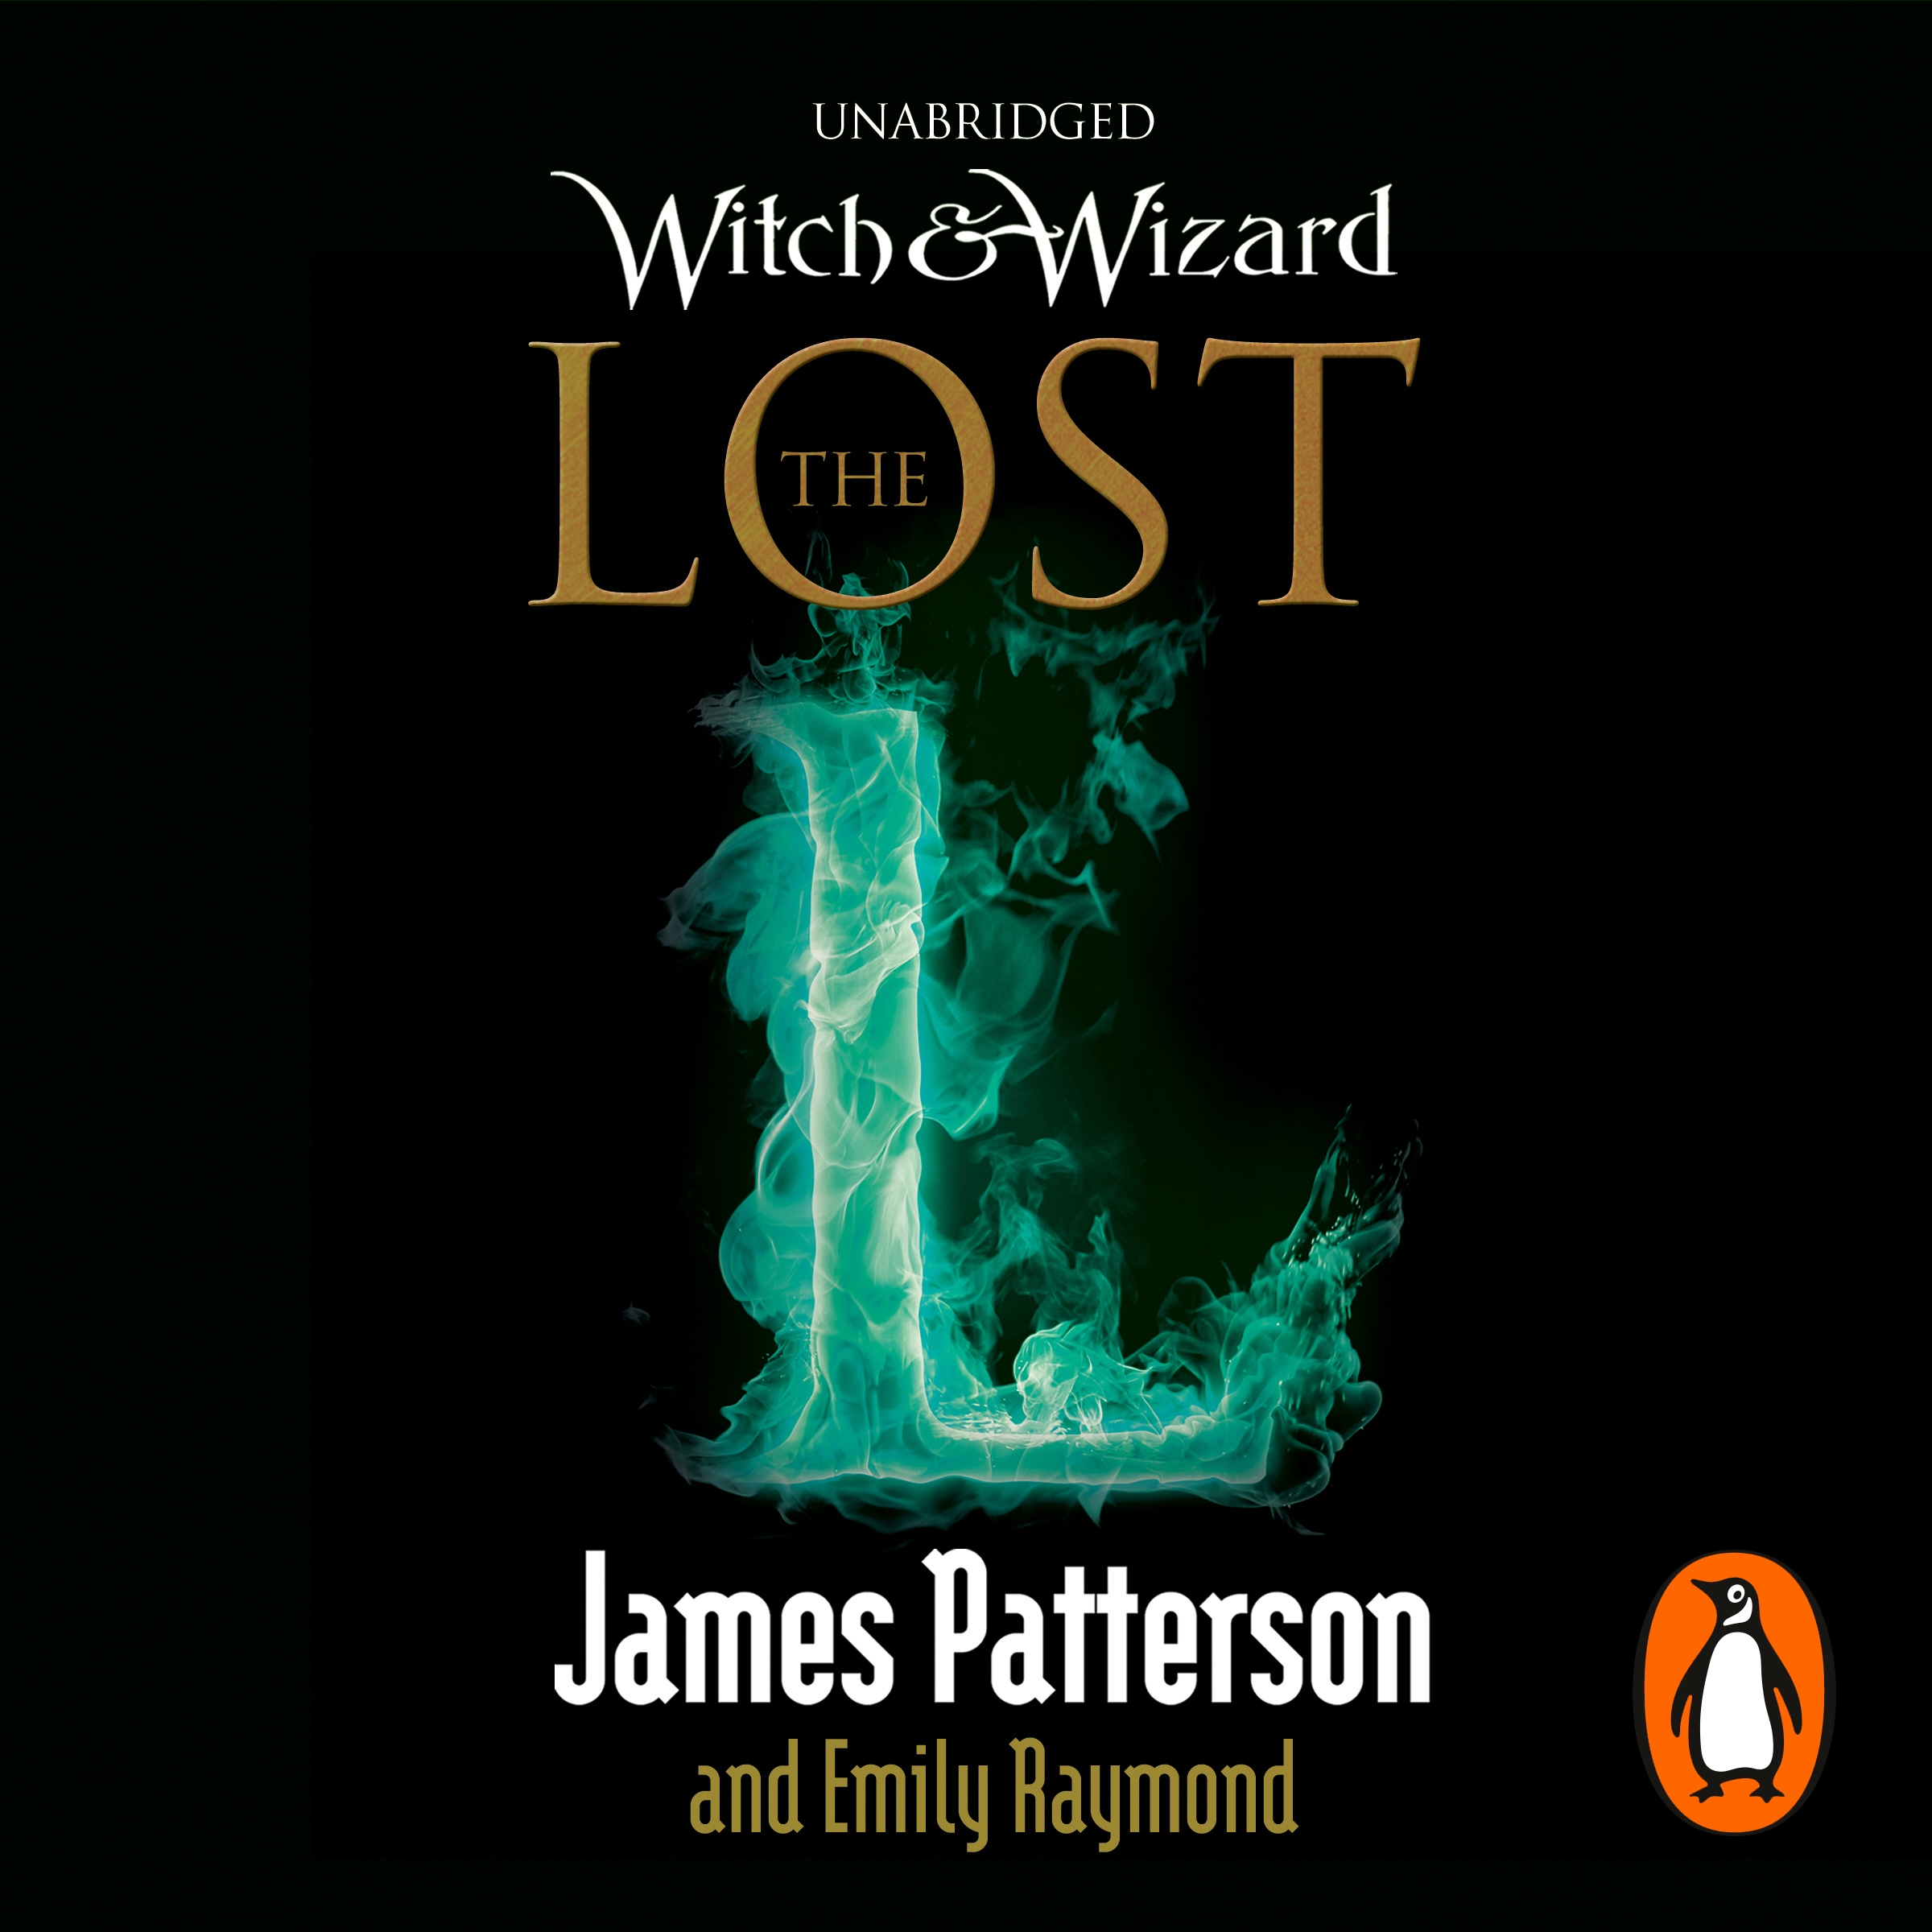 james patterson witch and wizard book order